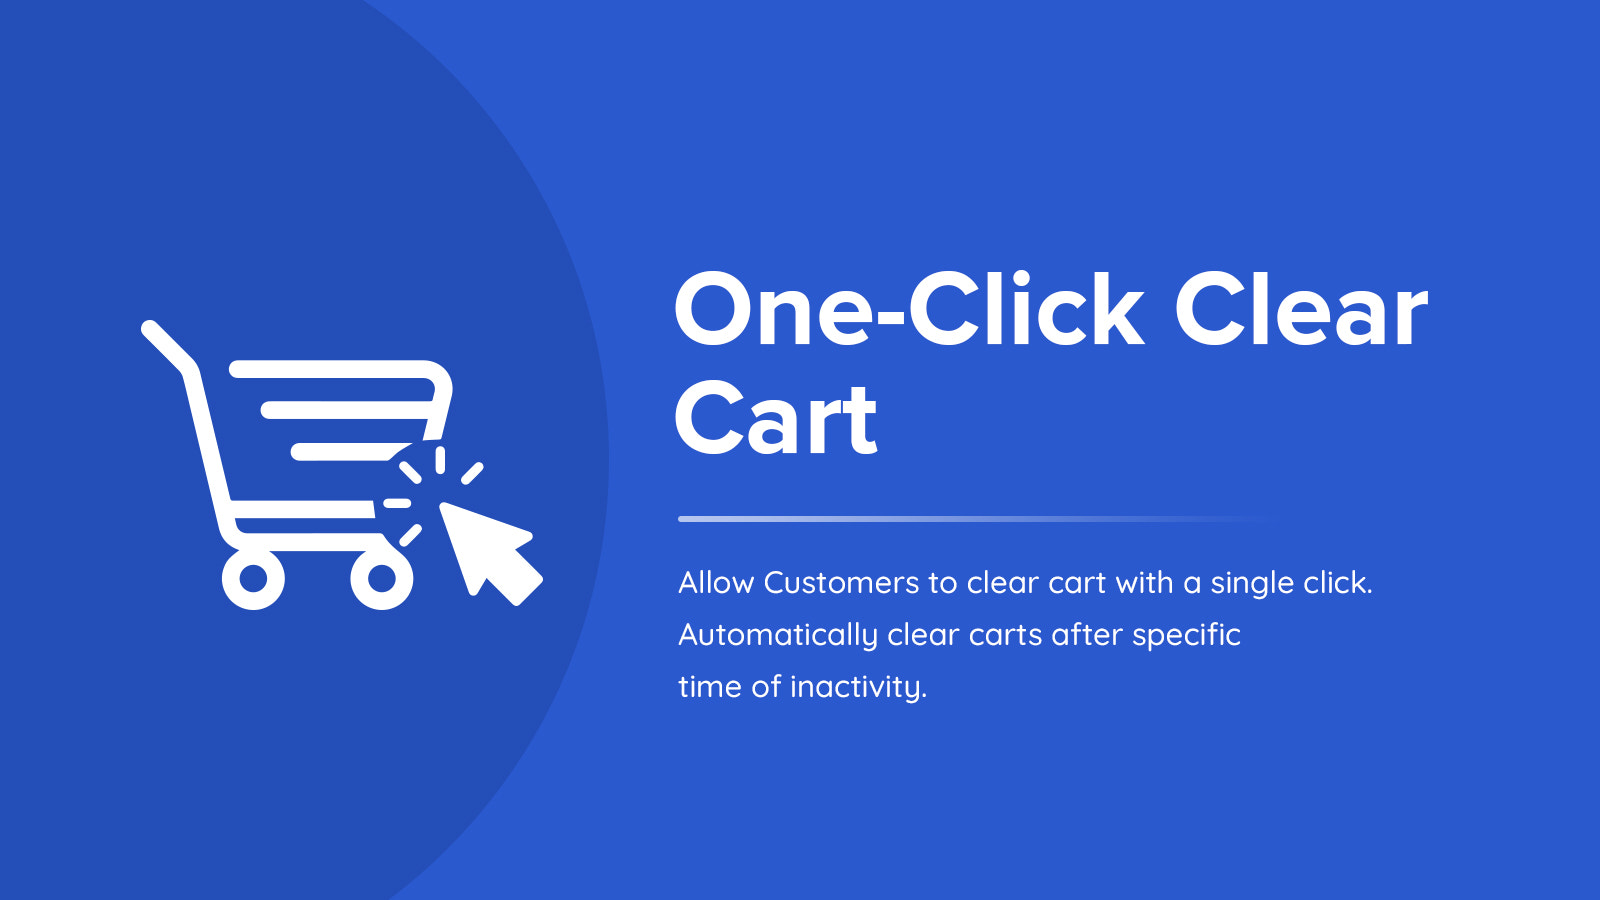 One-Click Clear Cart